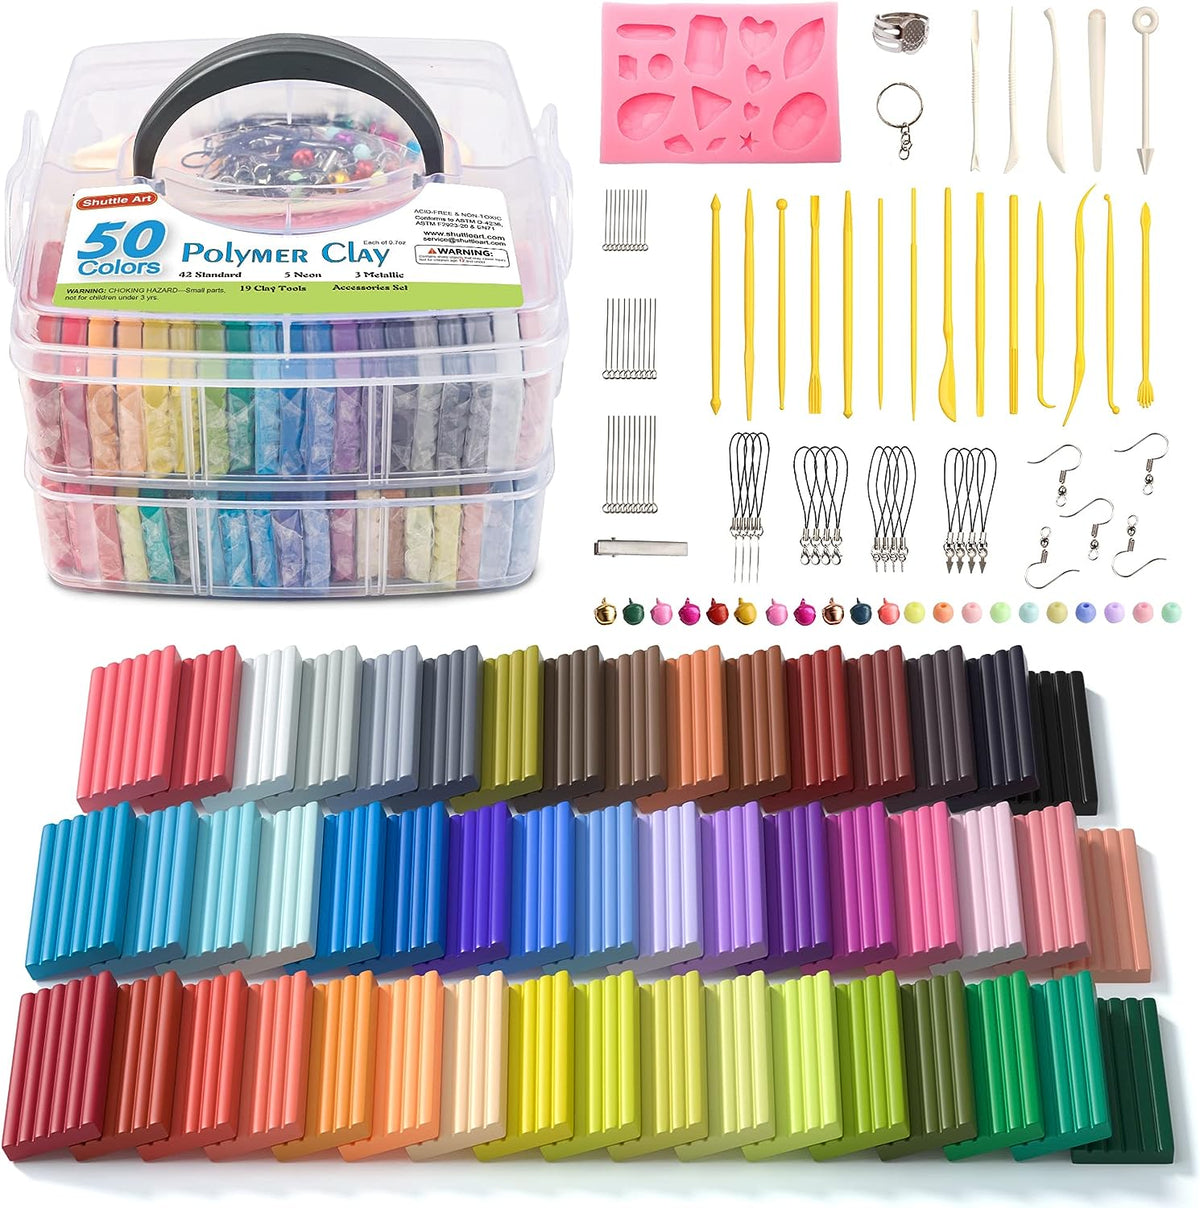 Polymer Clay, Shuttle Art 57 Colors Oven Bake Modeling Clay, Creative Clay Kit with 19 Clay Tools and 10 Kinds of Accessories, Non-Toxic, Non-sticky